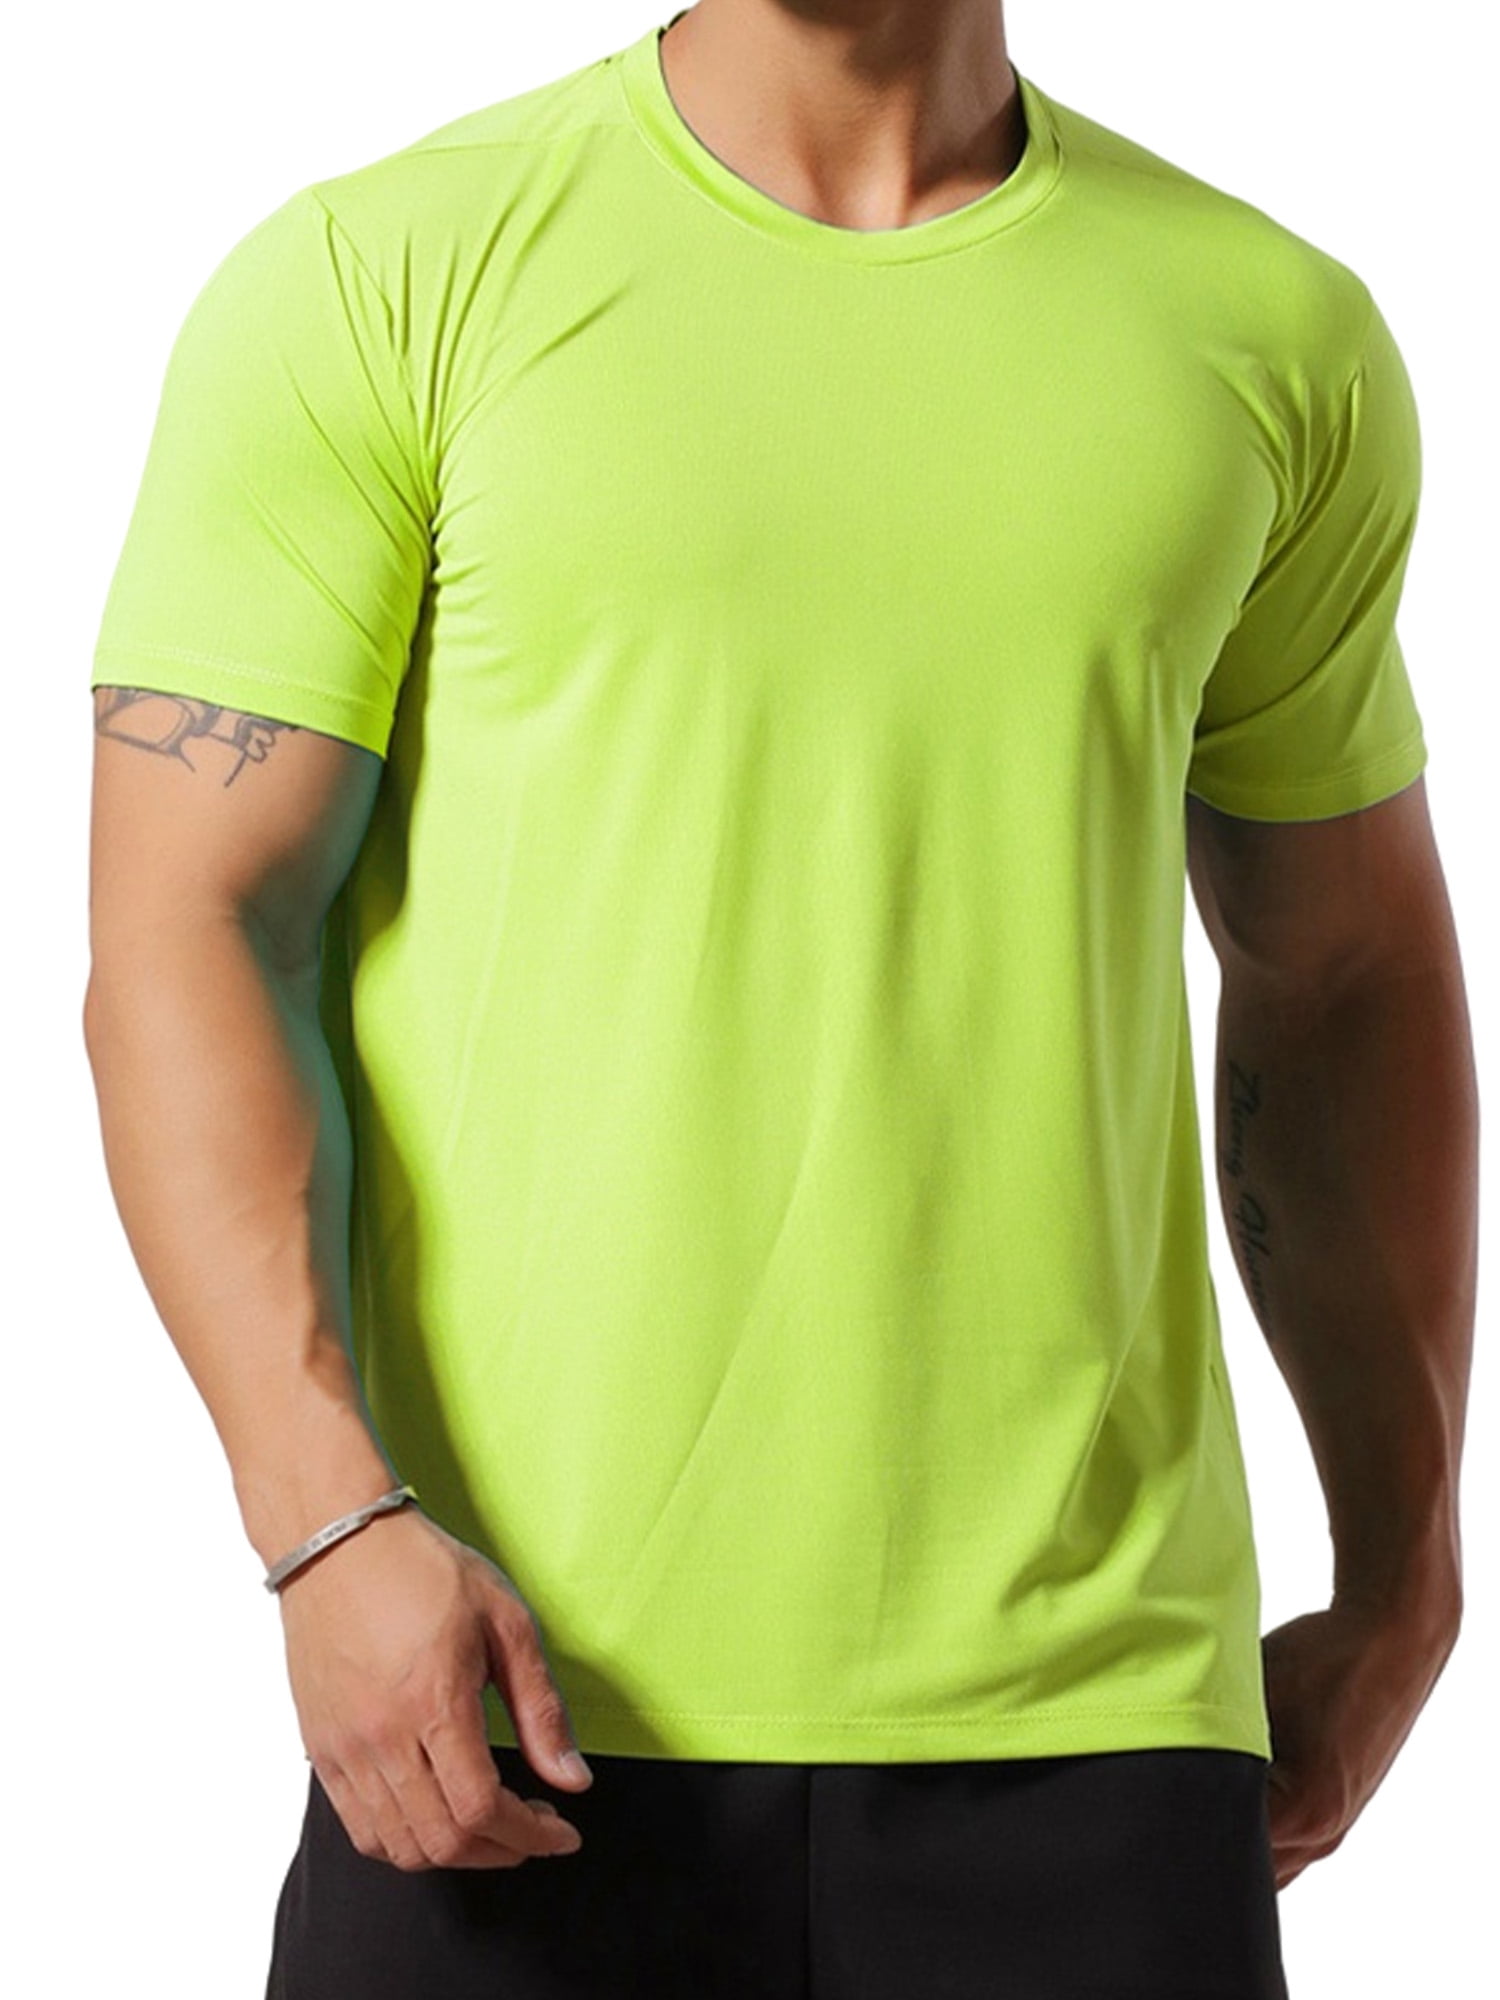 Mstyle Mens Active Crew Neck Quickly Drying Short Sleeve Summer Shirt Tops Tee